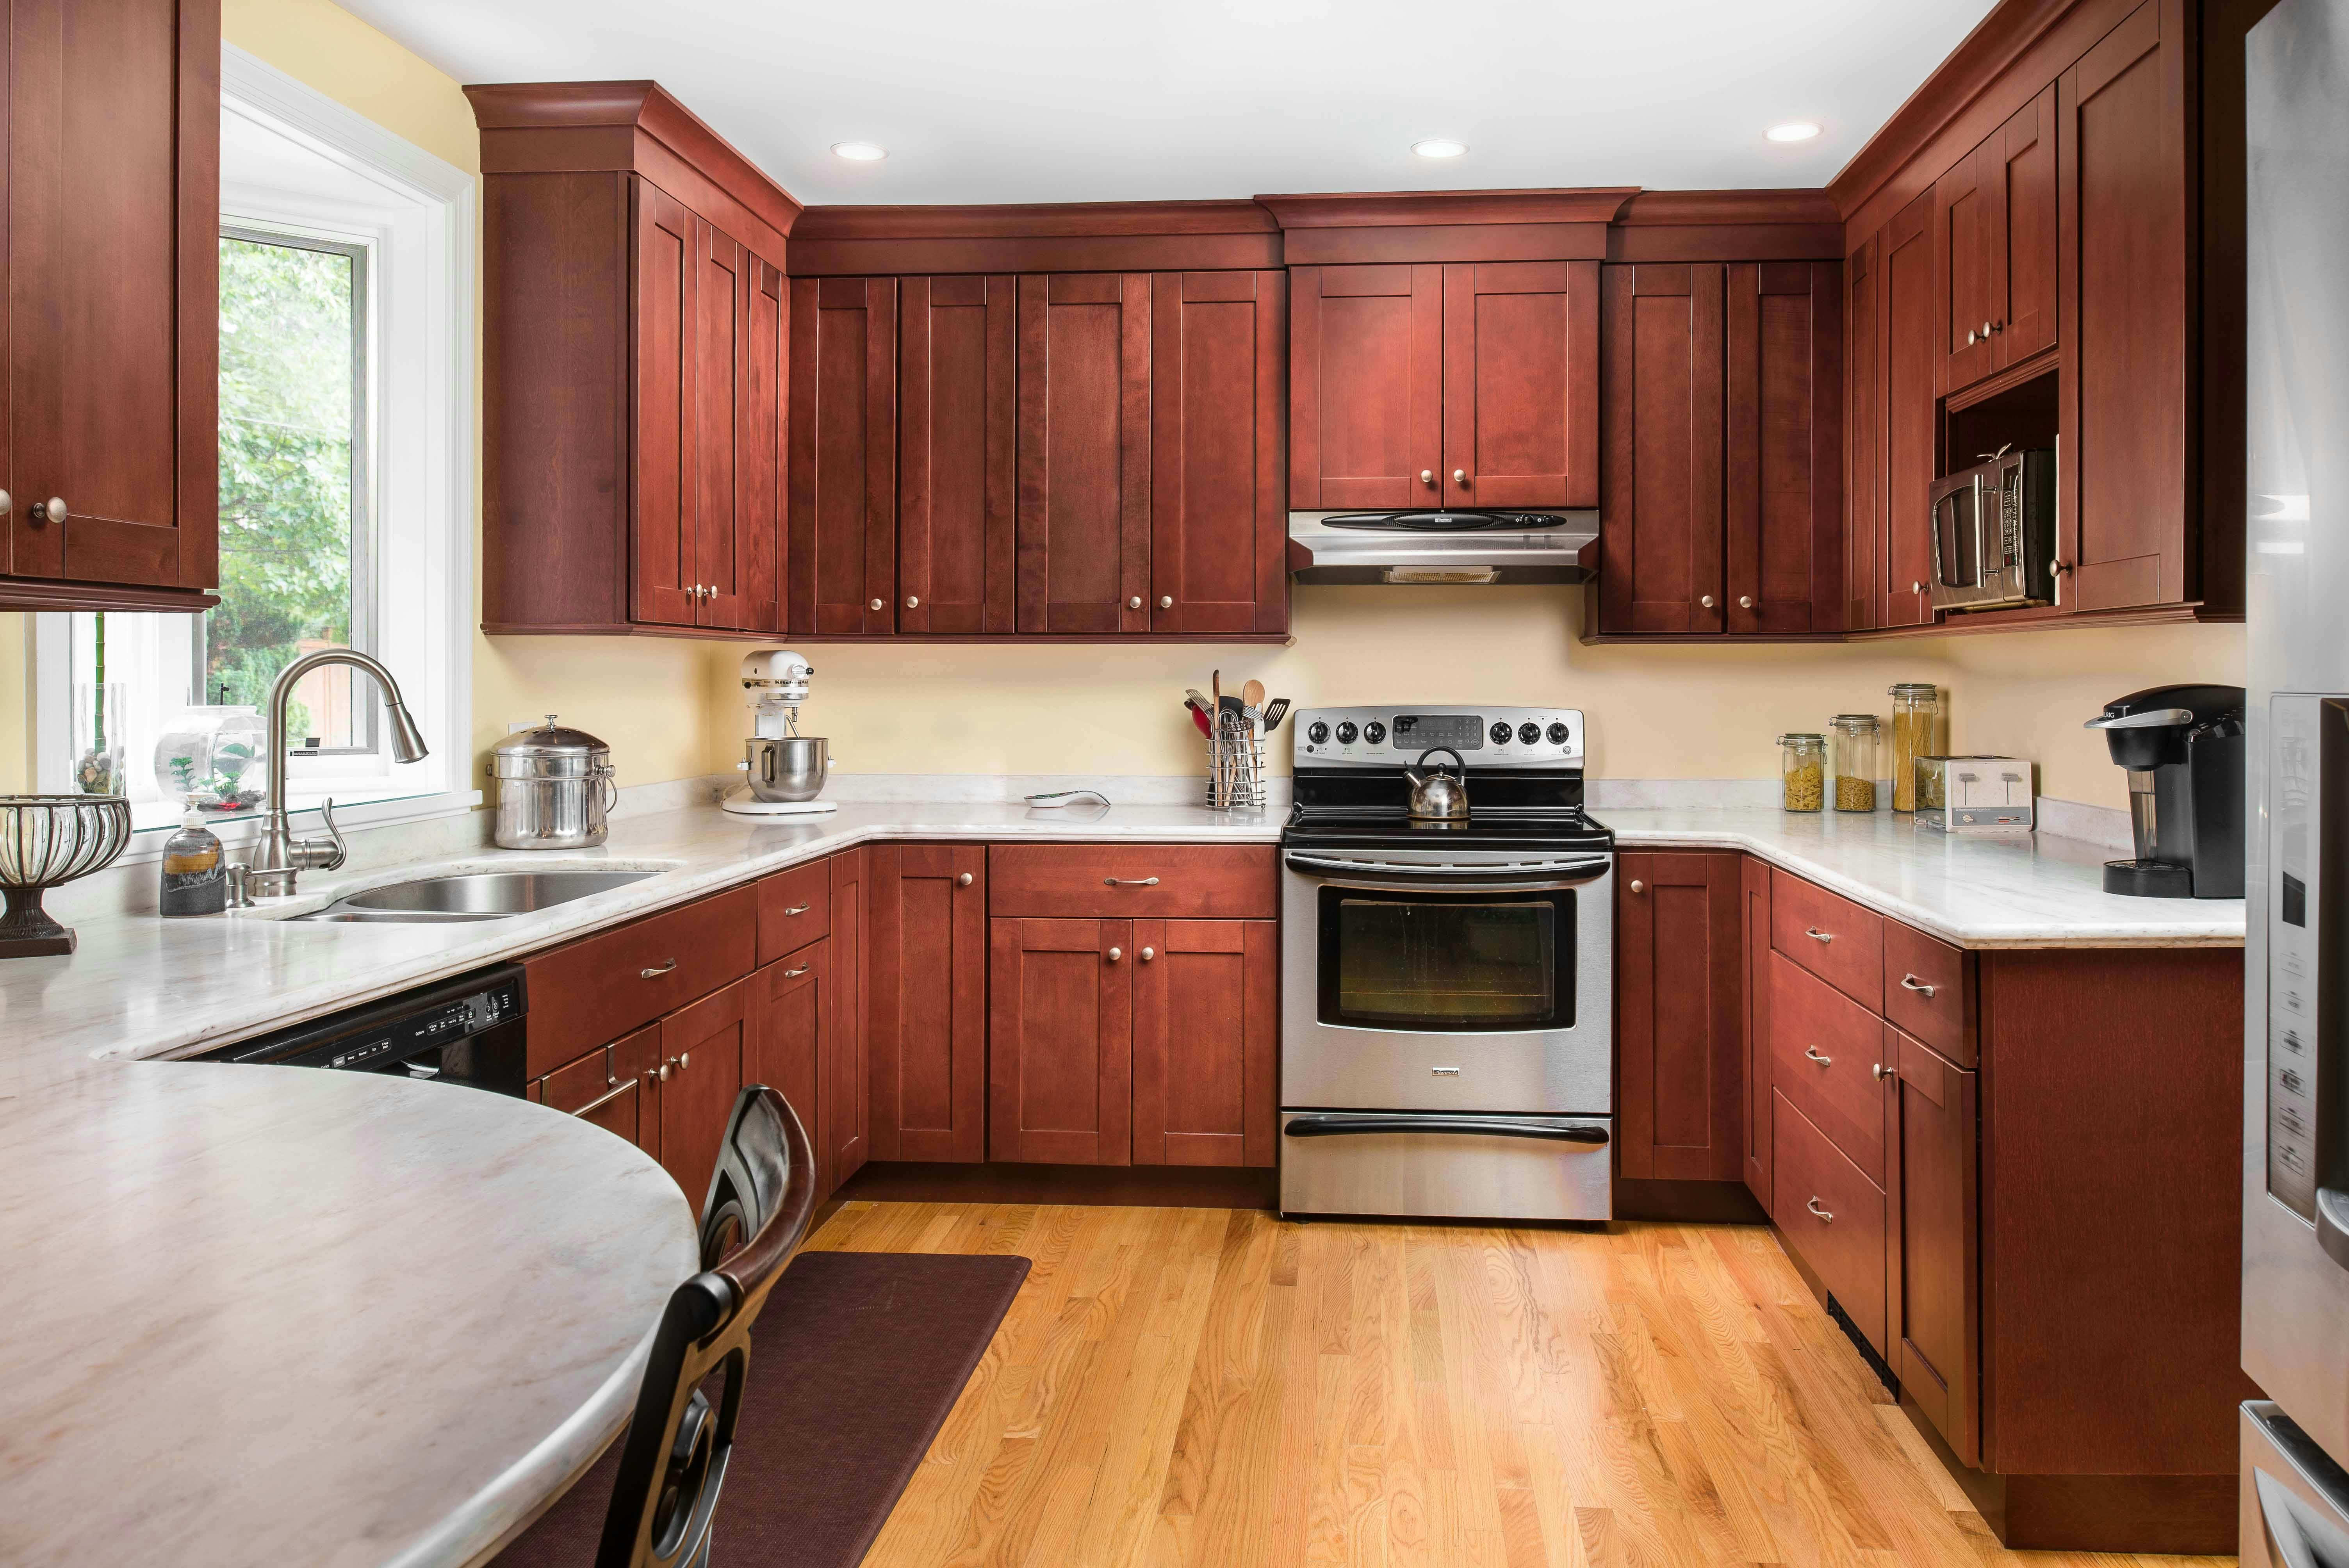 Https Wwwfabuwoodcom Post Why Shaker Style Kitchen Cabinets Never Go Out Of Style